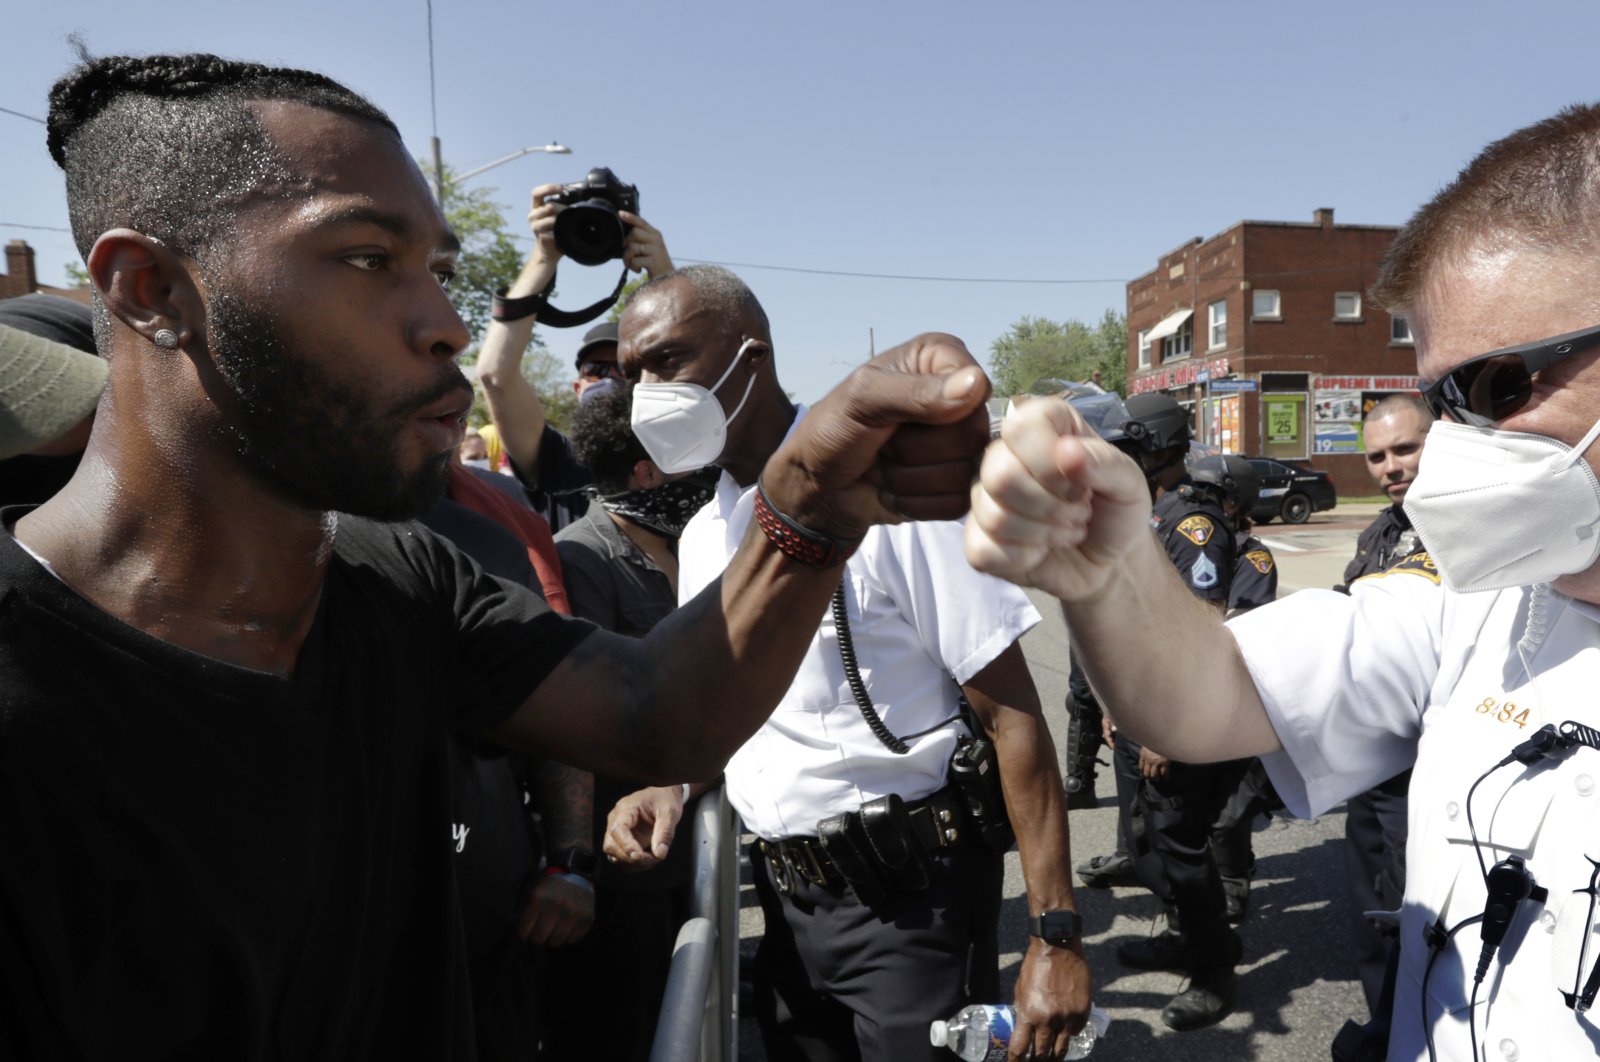 Cleveland Police First District Commander Daniel Fay, right, and a protester give each other a fist bump during a rally for black lives, in Cleveland, Ohio, June 2, 2020. (AP Photo)